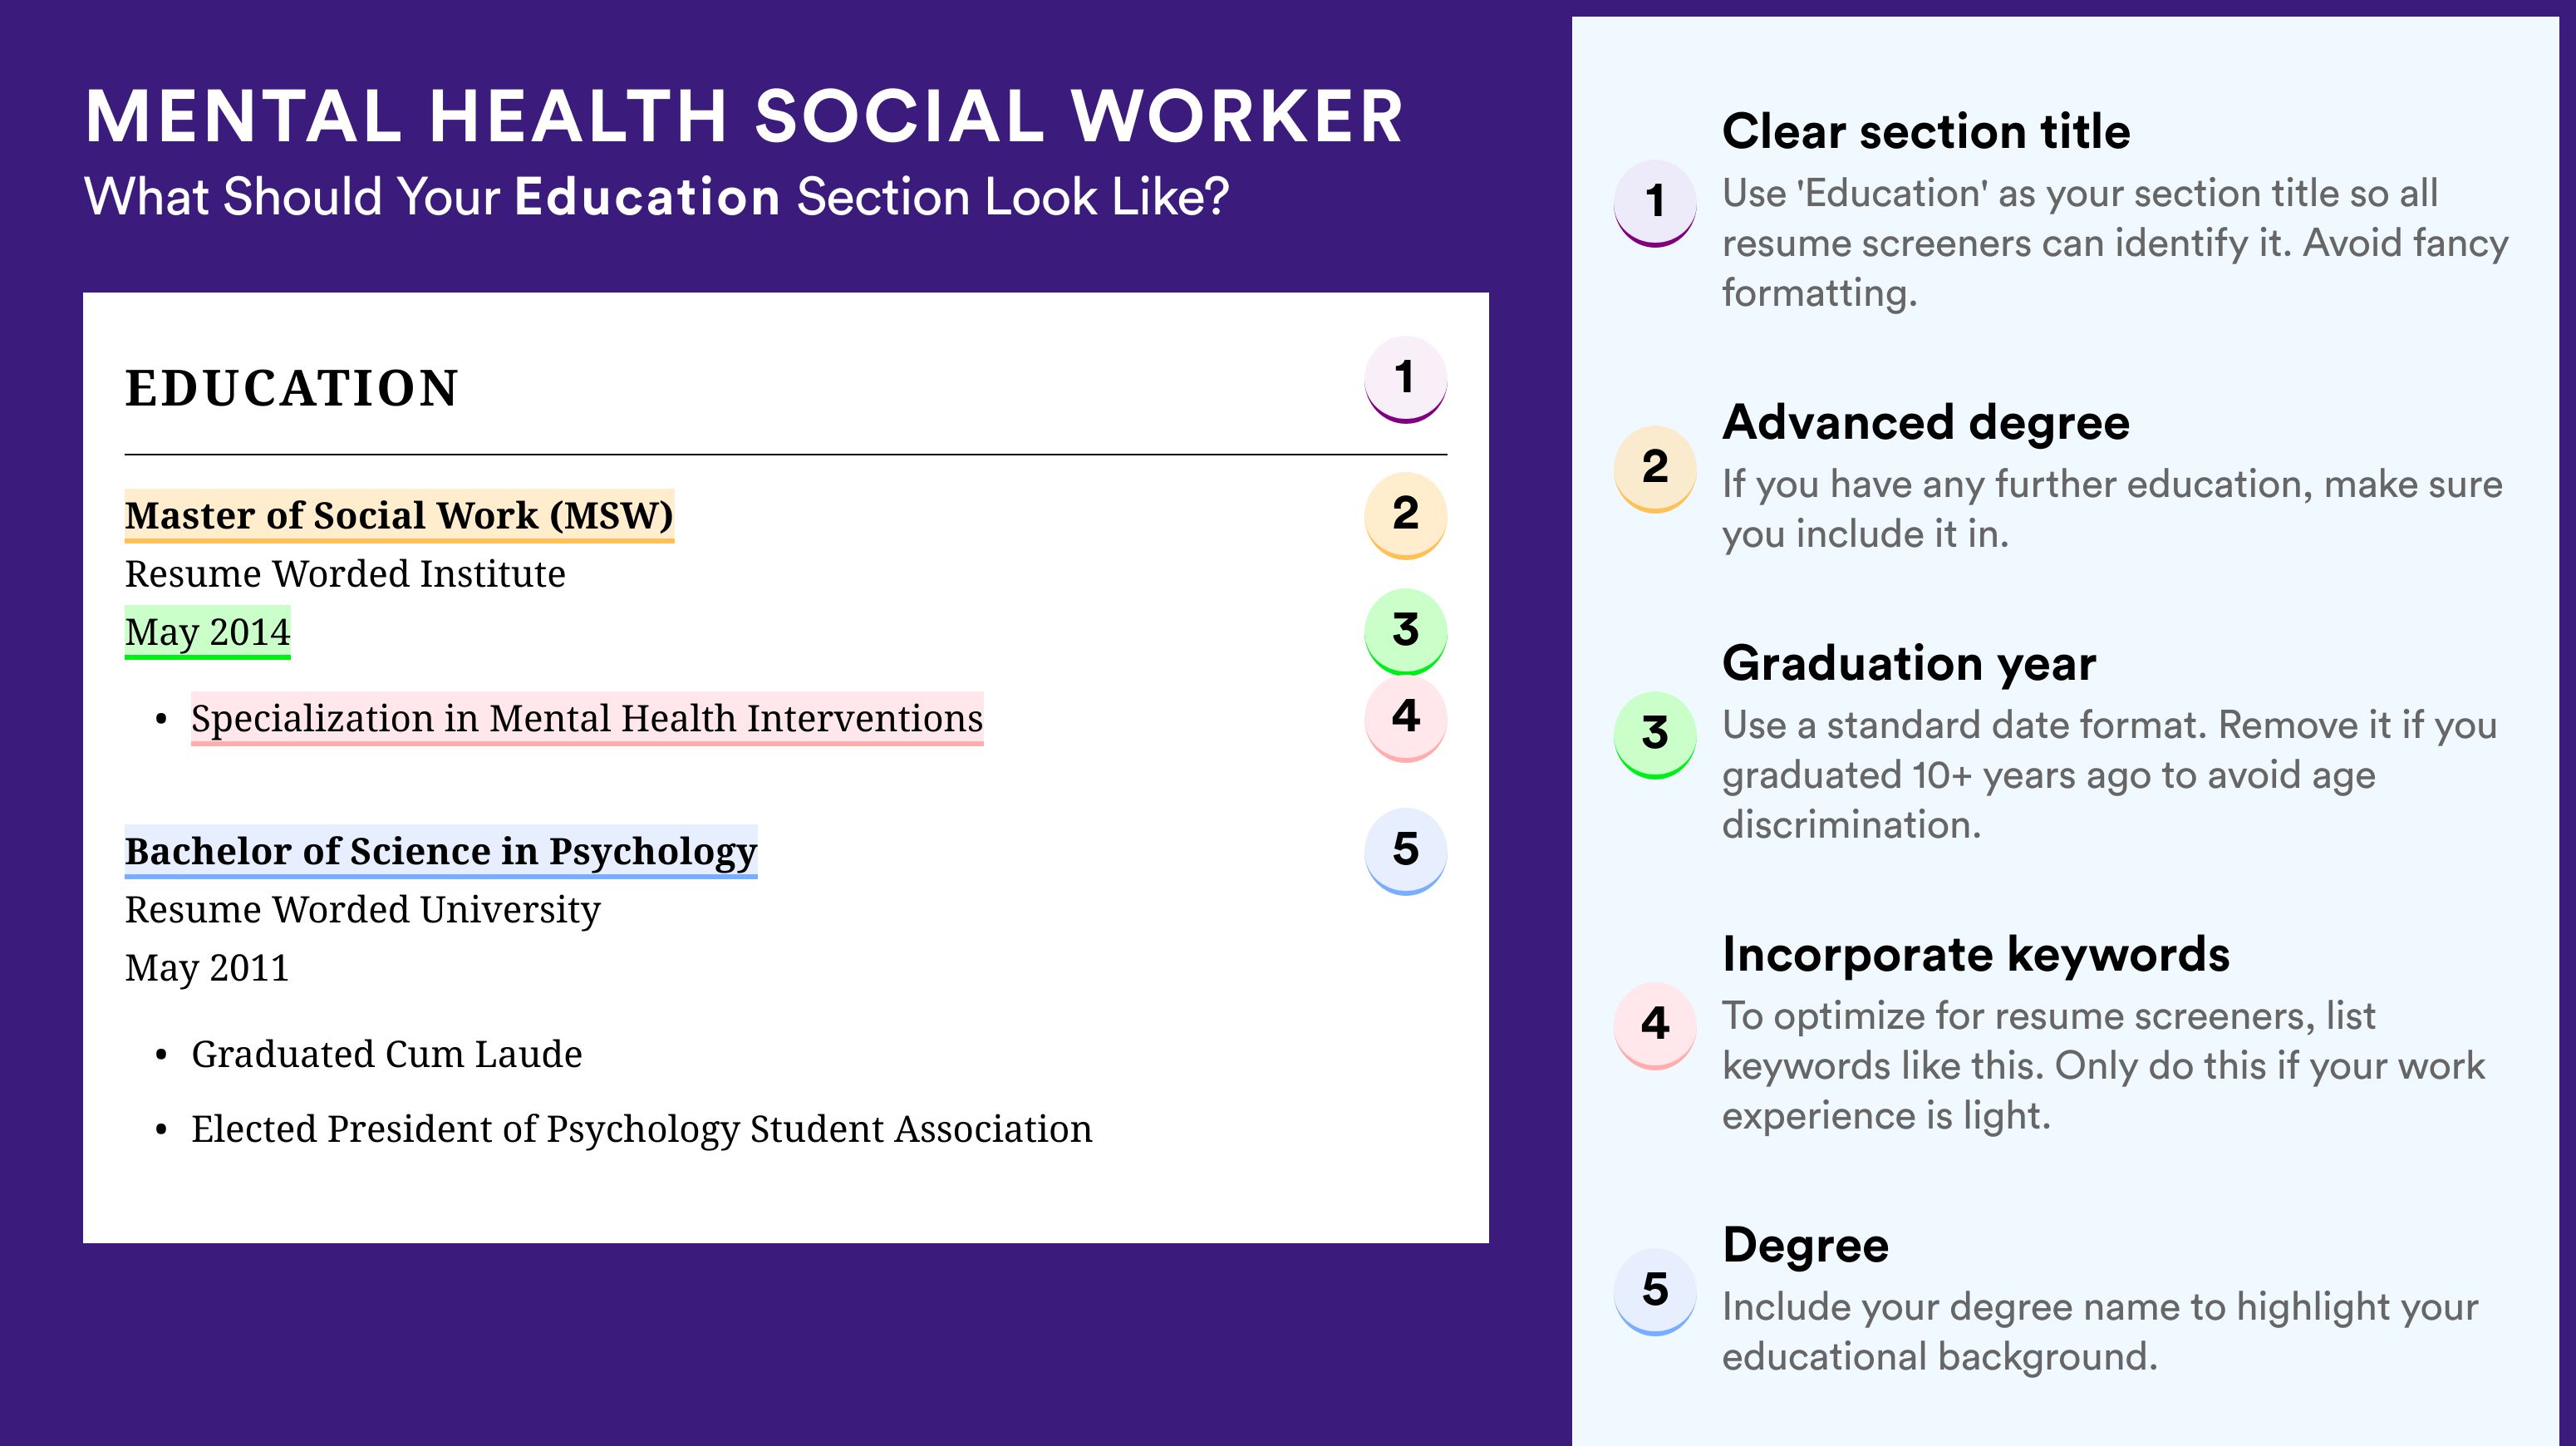 How To Write An Education Section - Mental Health Social Worker Roles